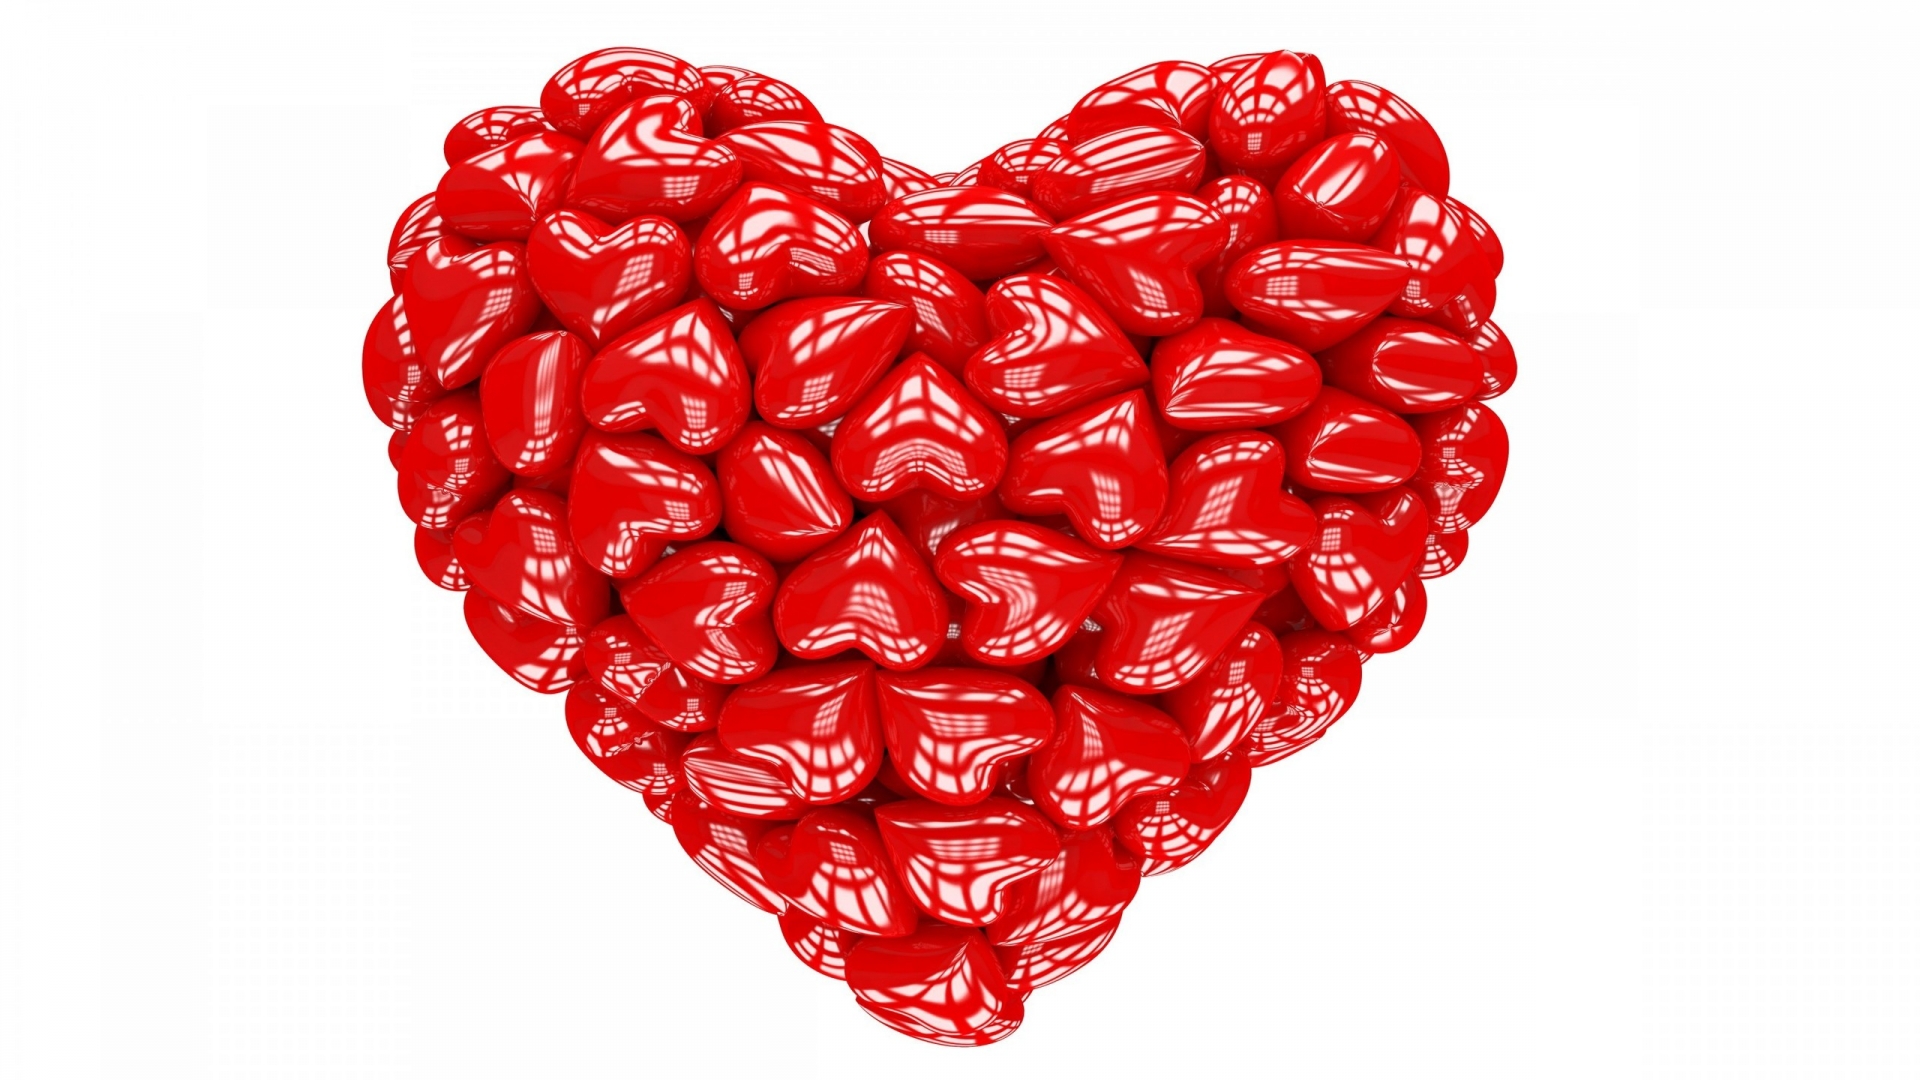 Red Heart 3D for 1920 x 1080 HDTV 1080p resolution